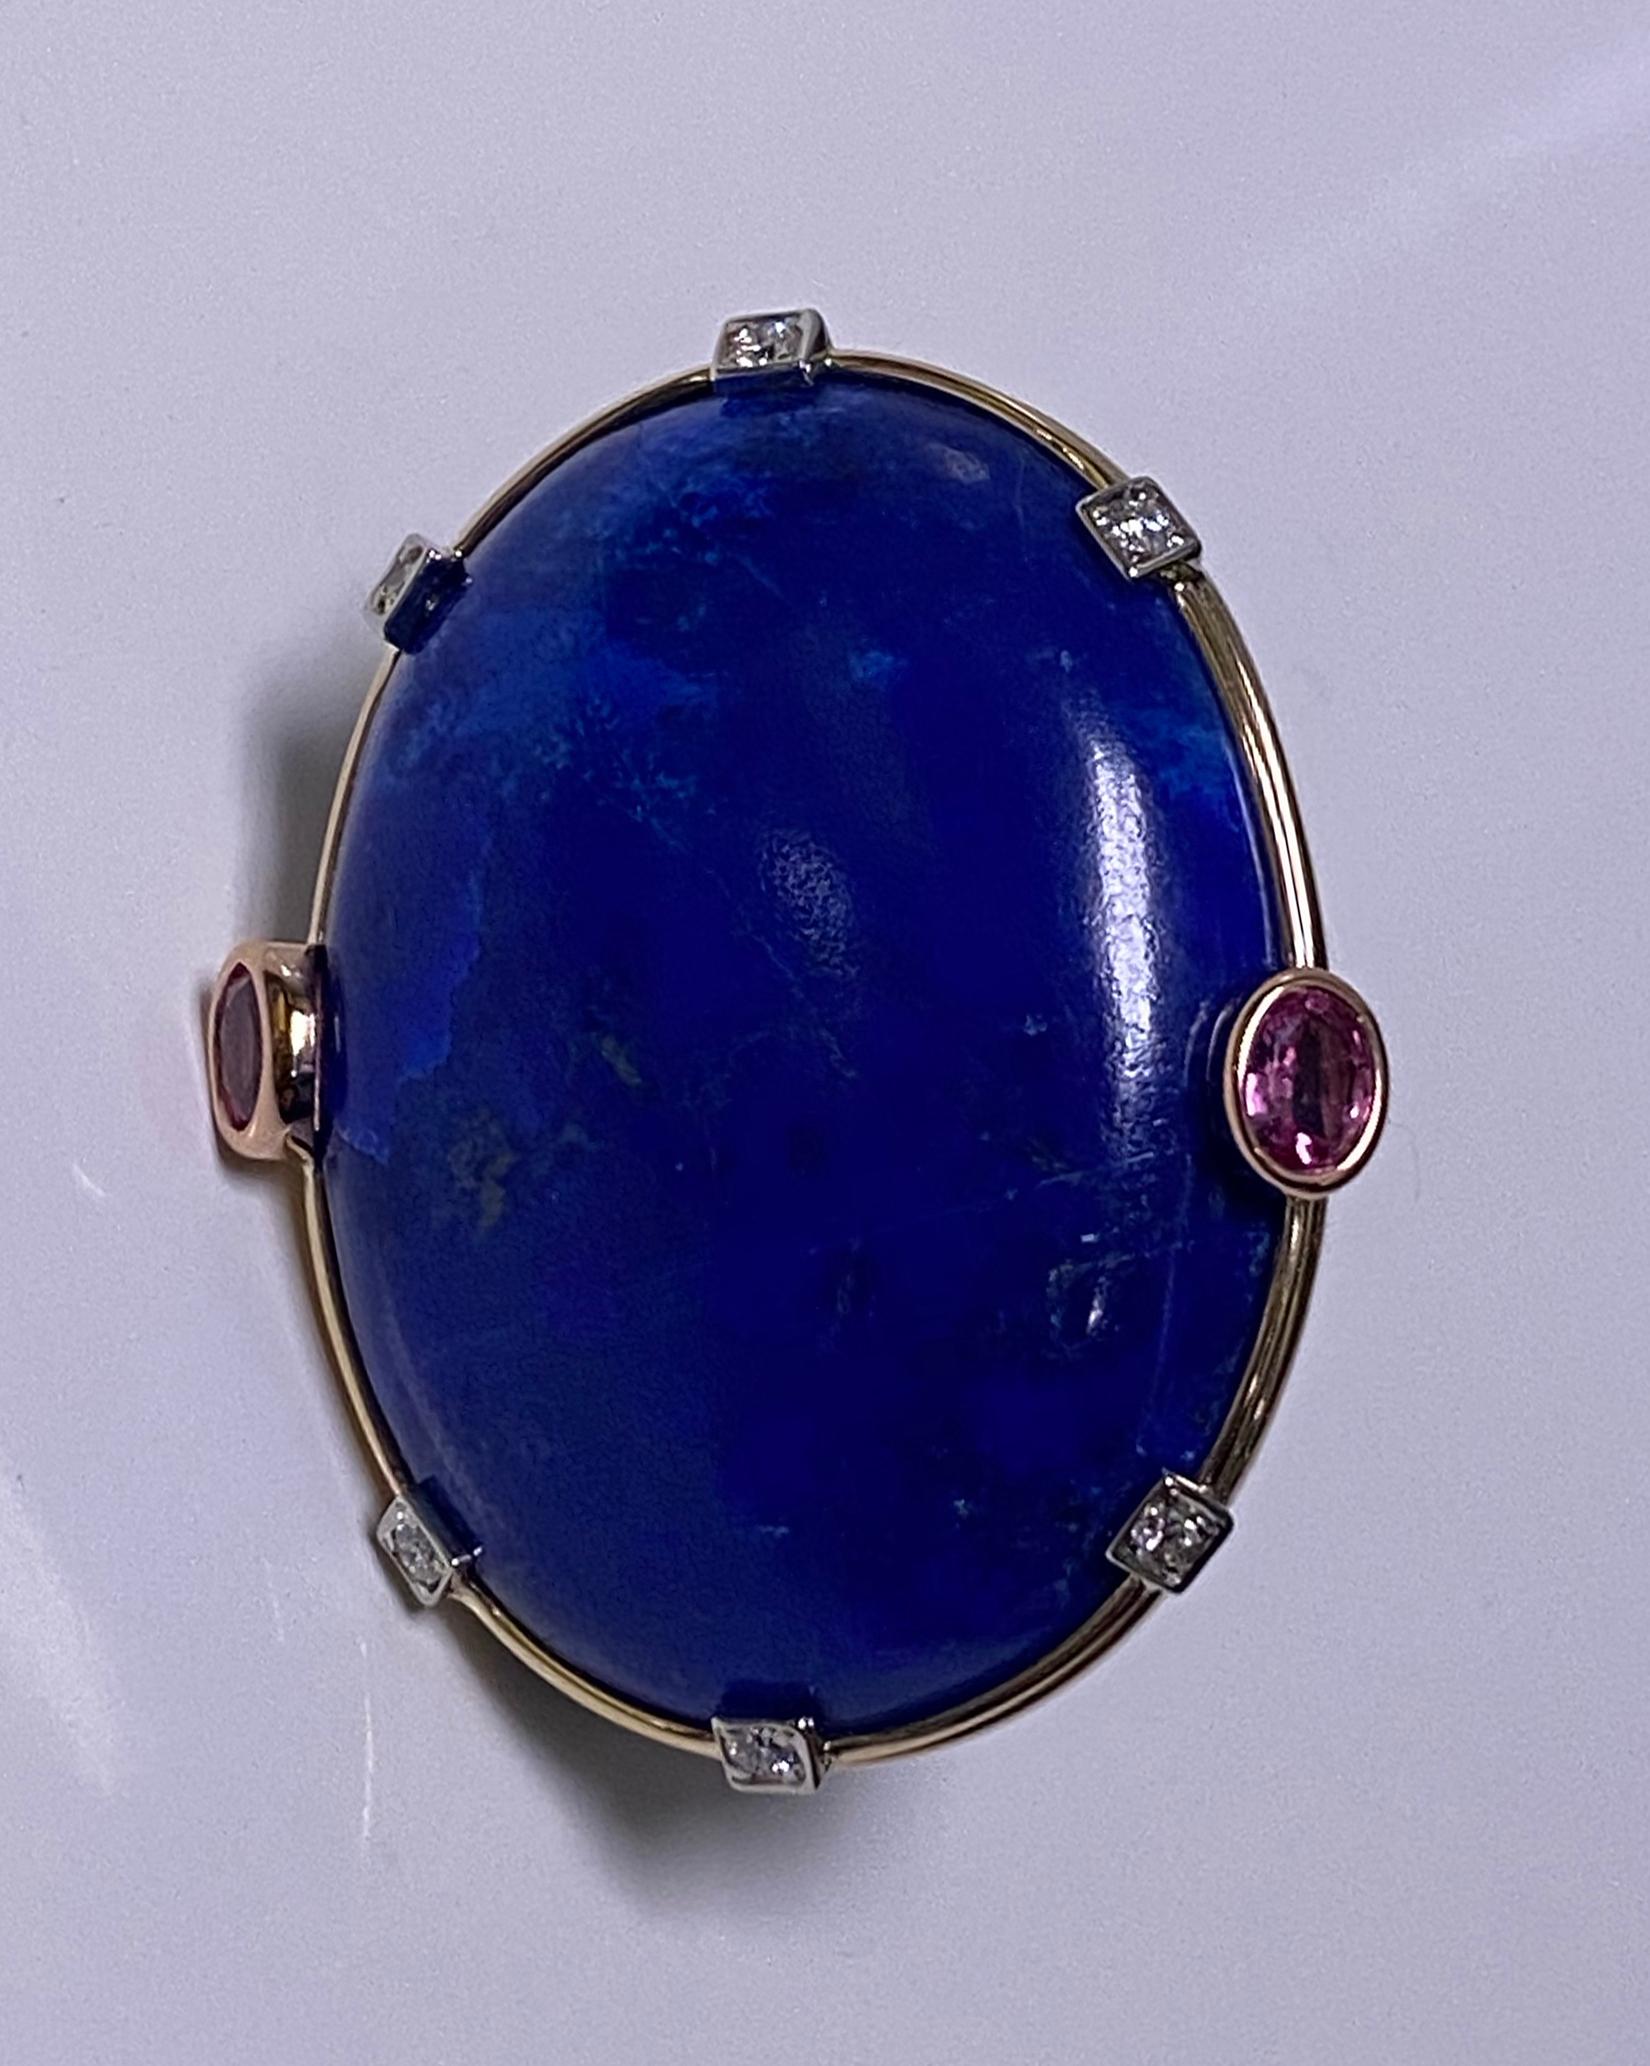 Large Lapis Lazuli Sapphire Diamond Gold Ring. Custom hand made set with a large oval cabochon lapis lazuli gauging approximately 38.0 x 28.0 x 22.5 mm, flanked on either side with an oval faceted pink sapphire, approximately 0.75 ct each,  total